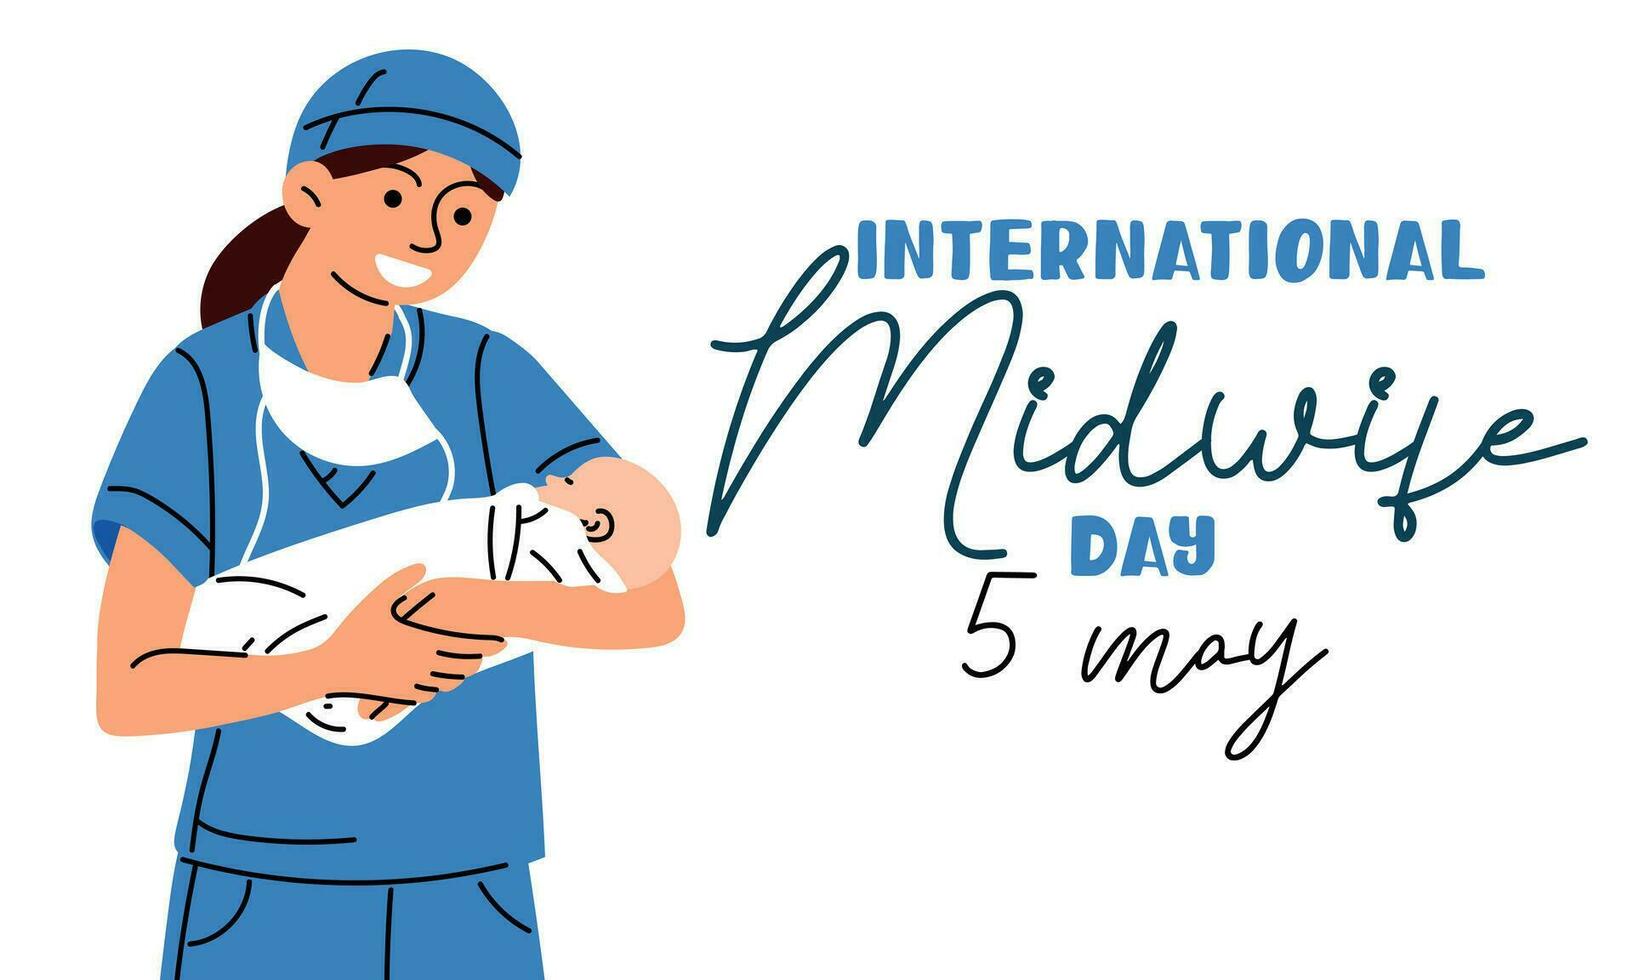 The International Day of Midwives is celebrated annually on May 5. Midwife, a medical professional who cares for mothers and newborns during childbirth. The midwife holds the newborn. Vector image